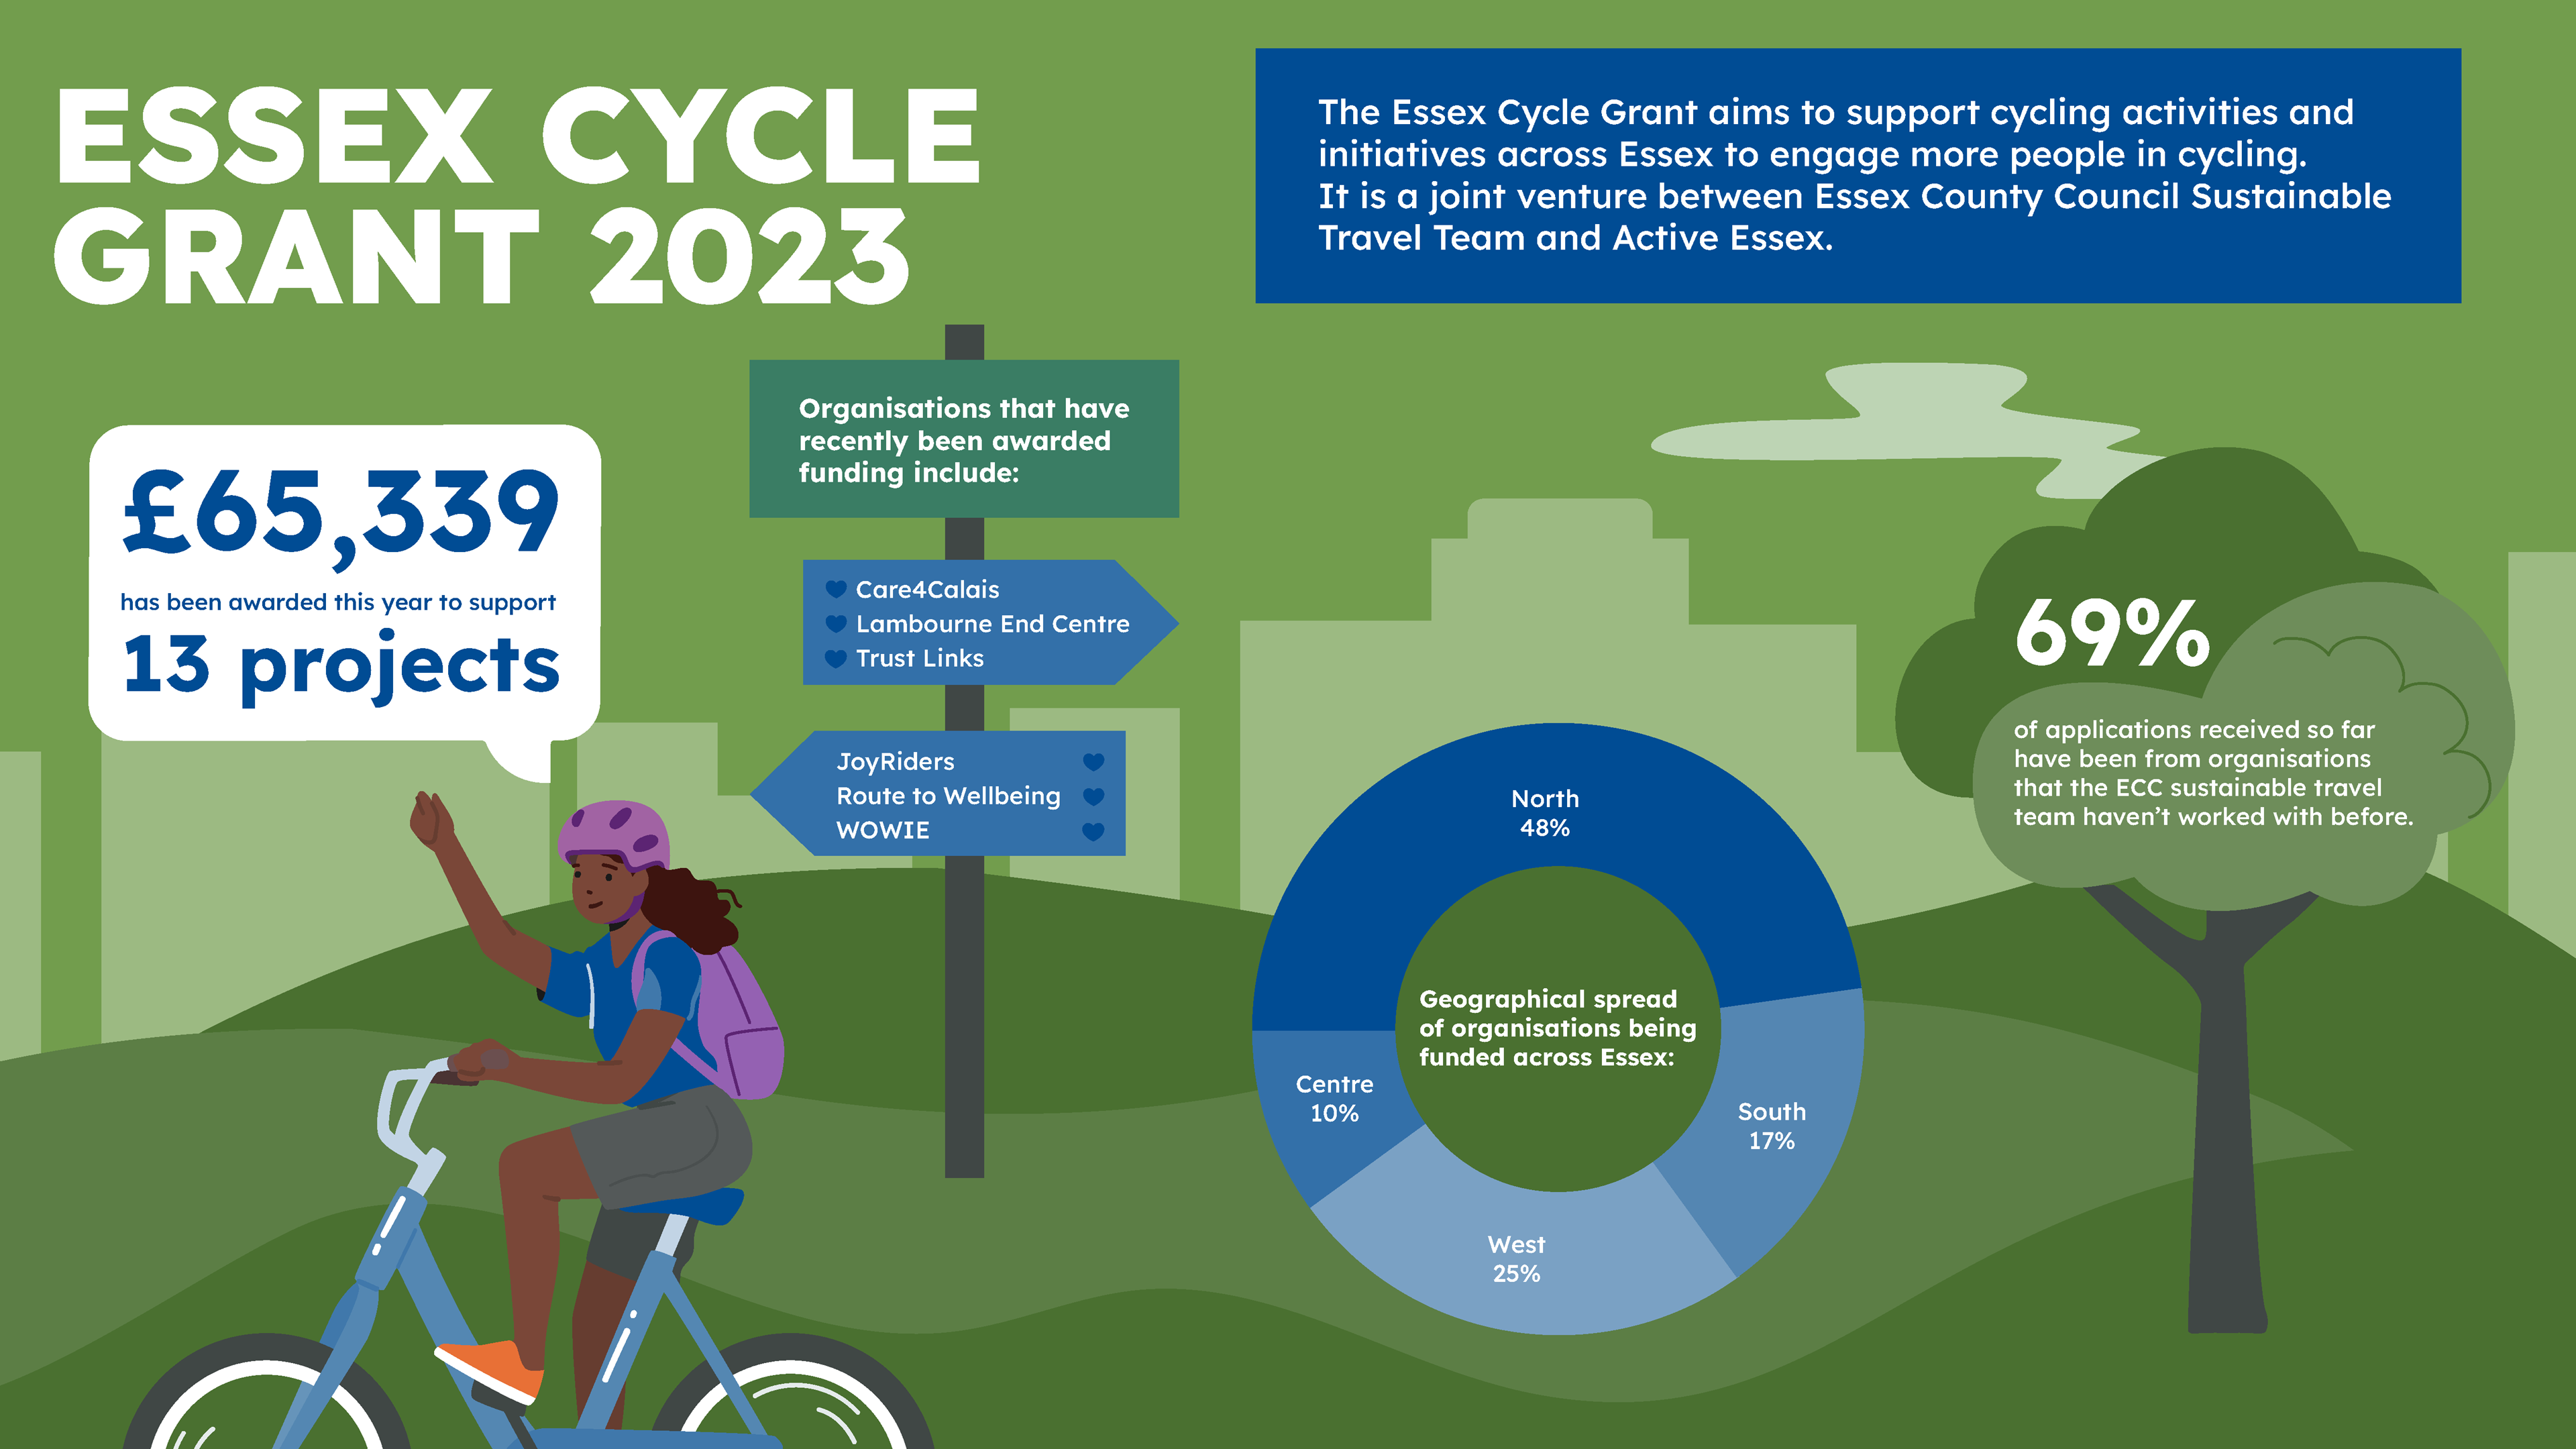 Essex Cycle Grant 2023 infrographic